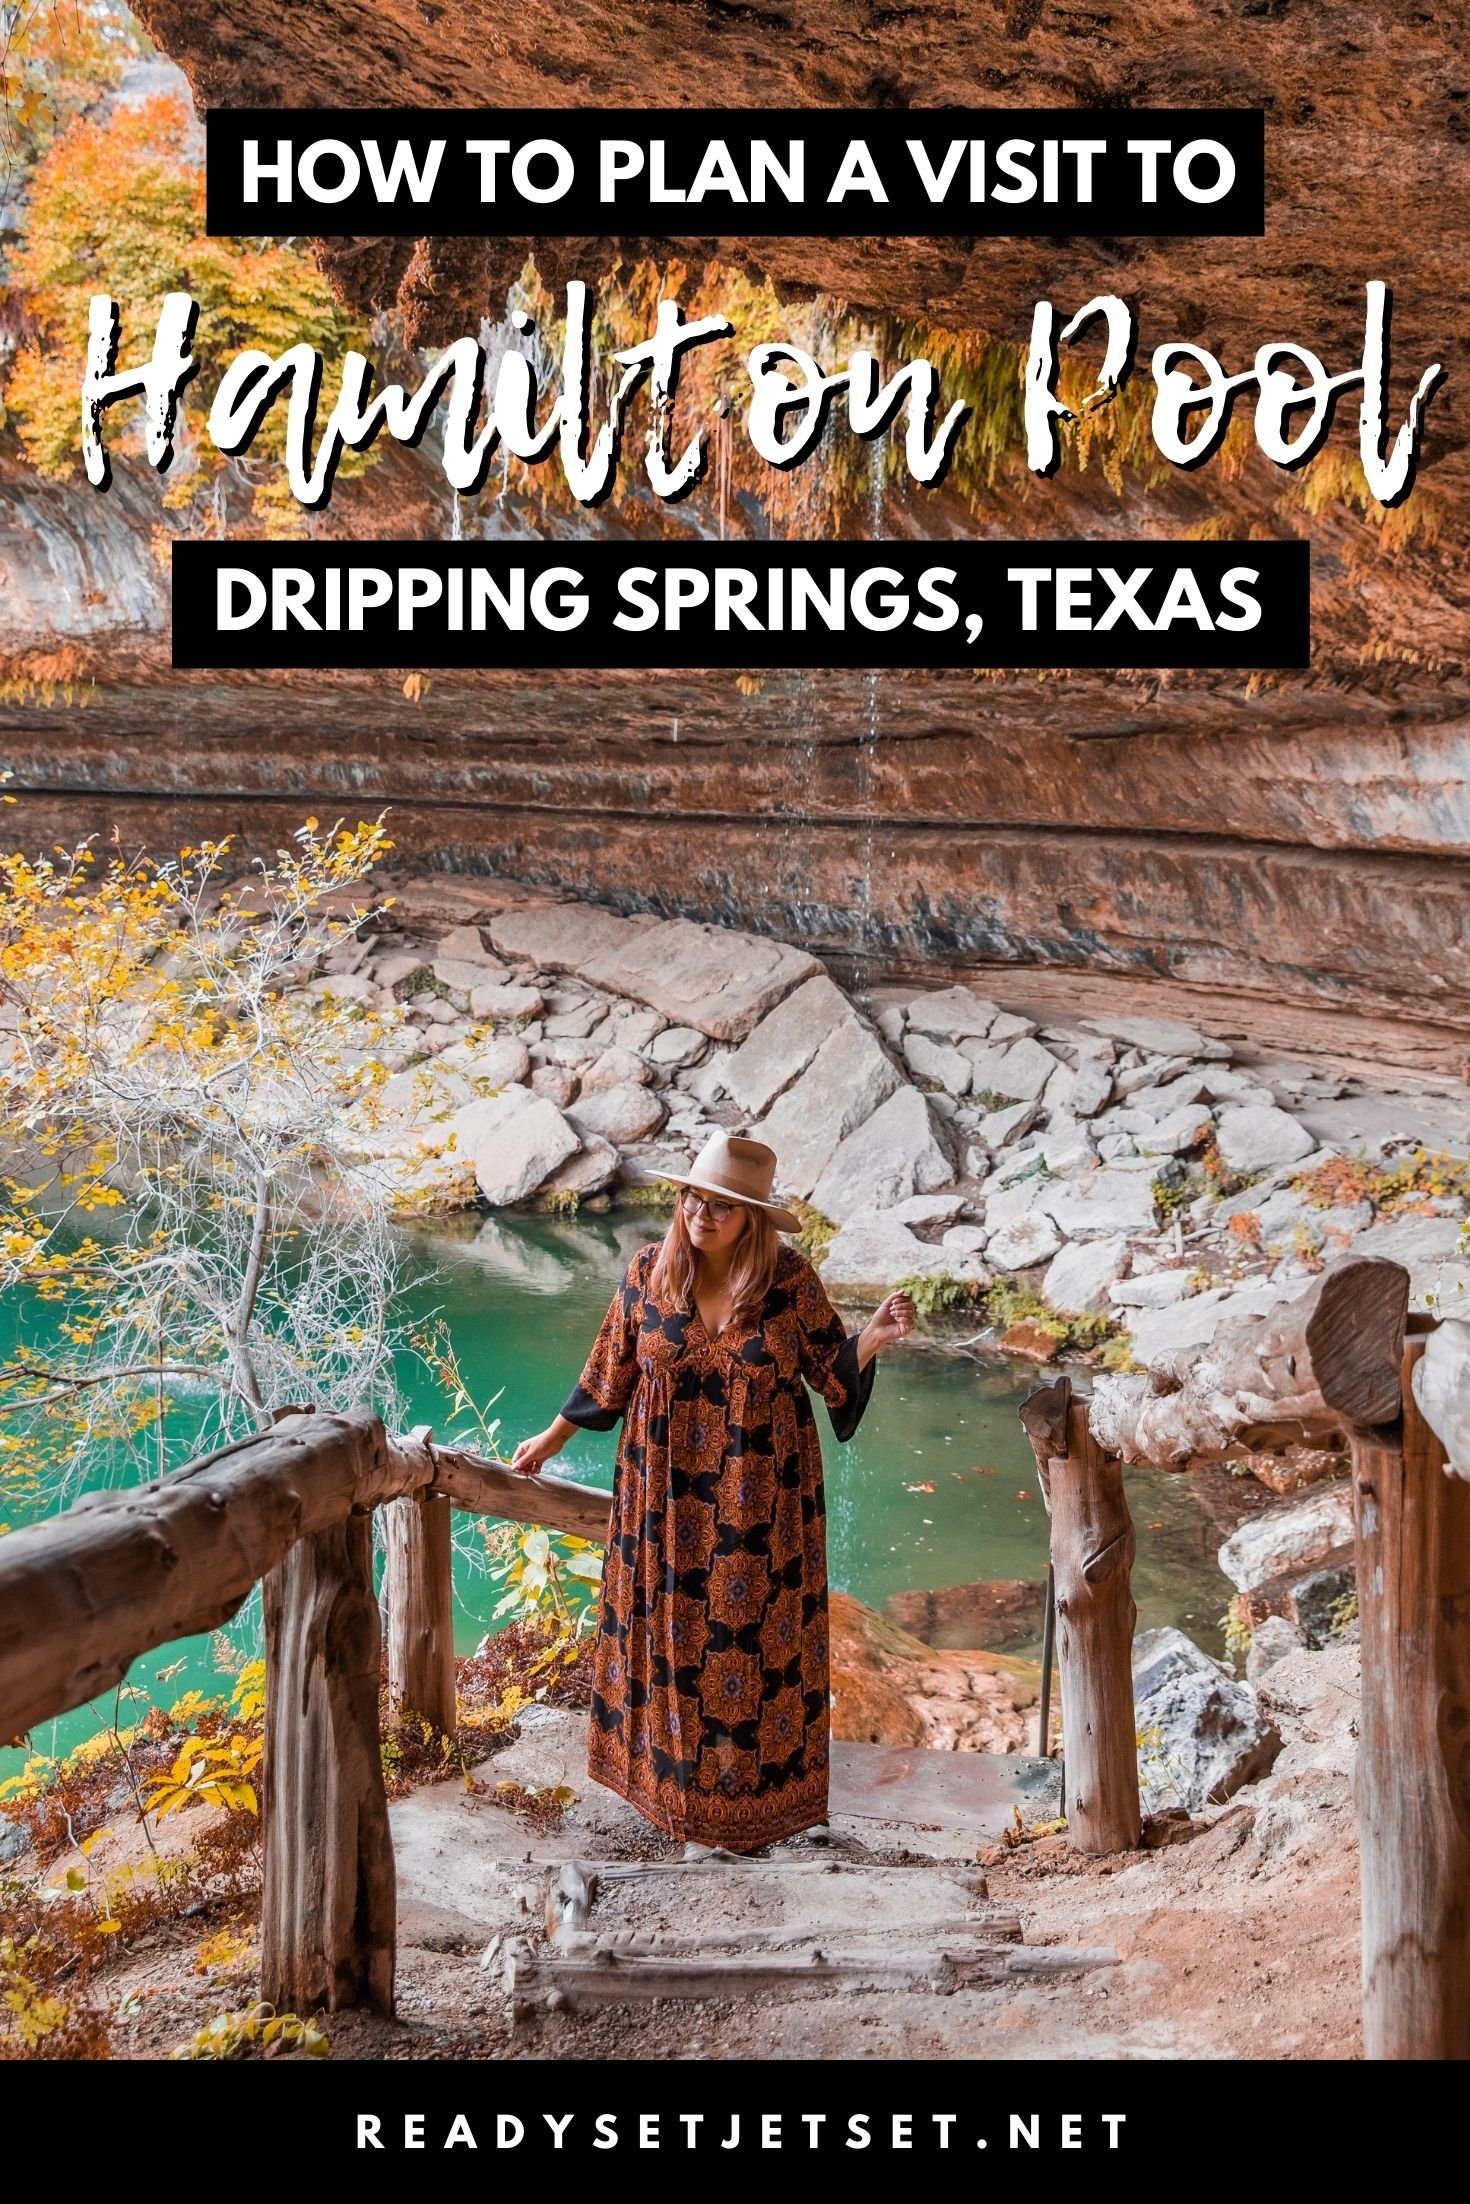 How to Plan a Visit to Hamilton Pool in Dripping Springs, Texas